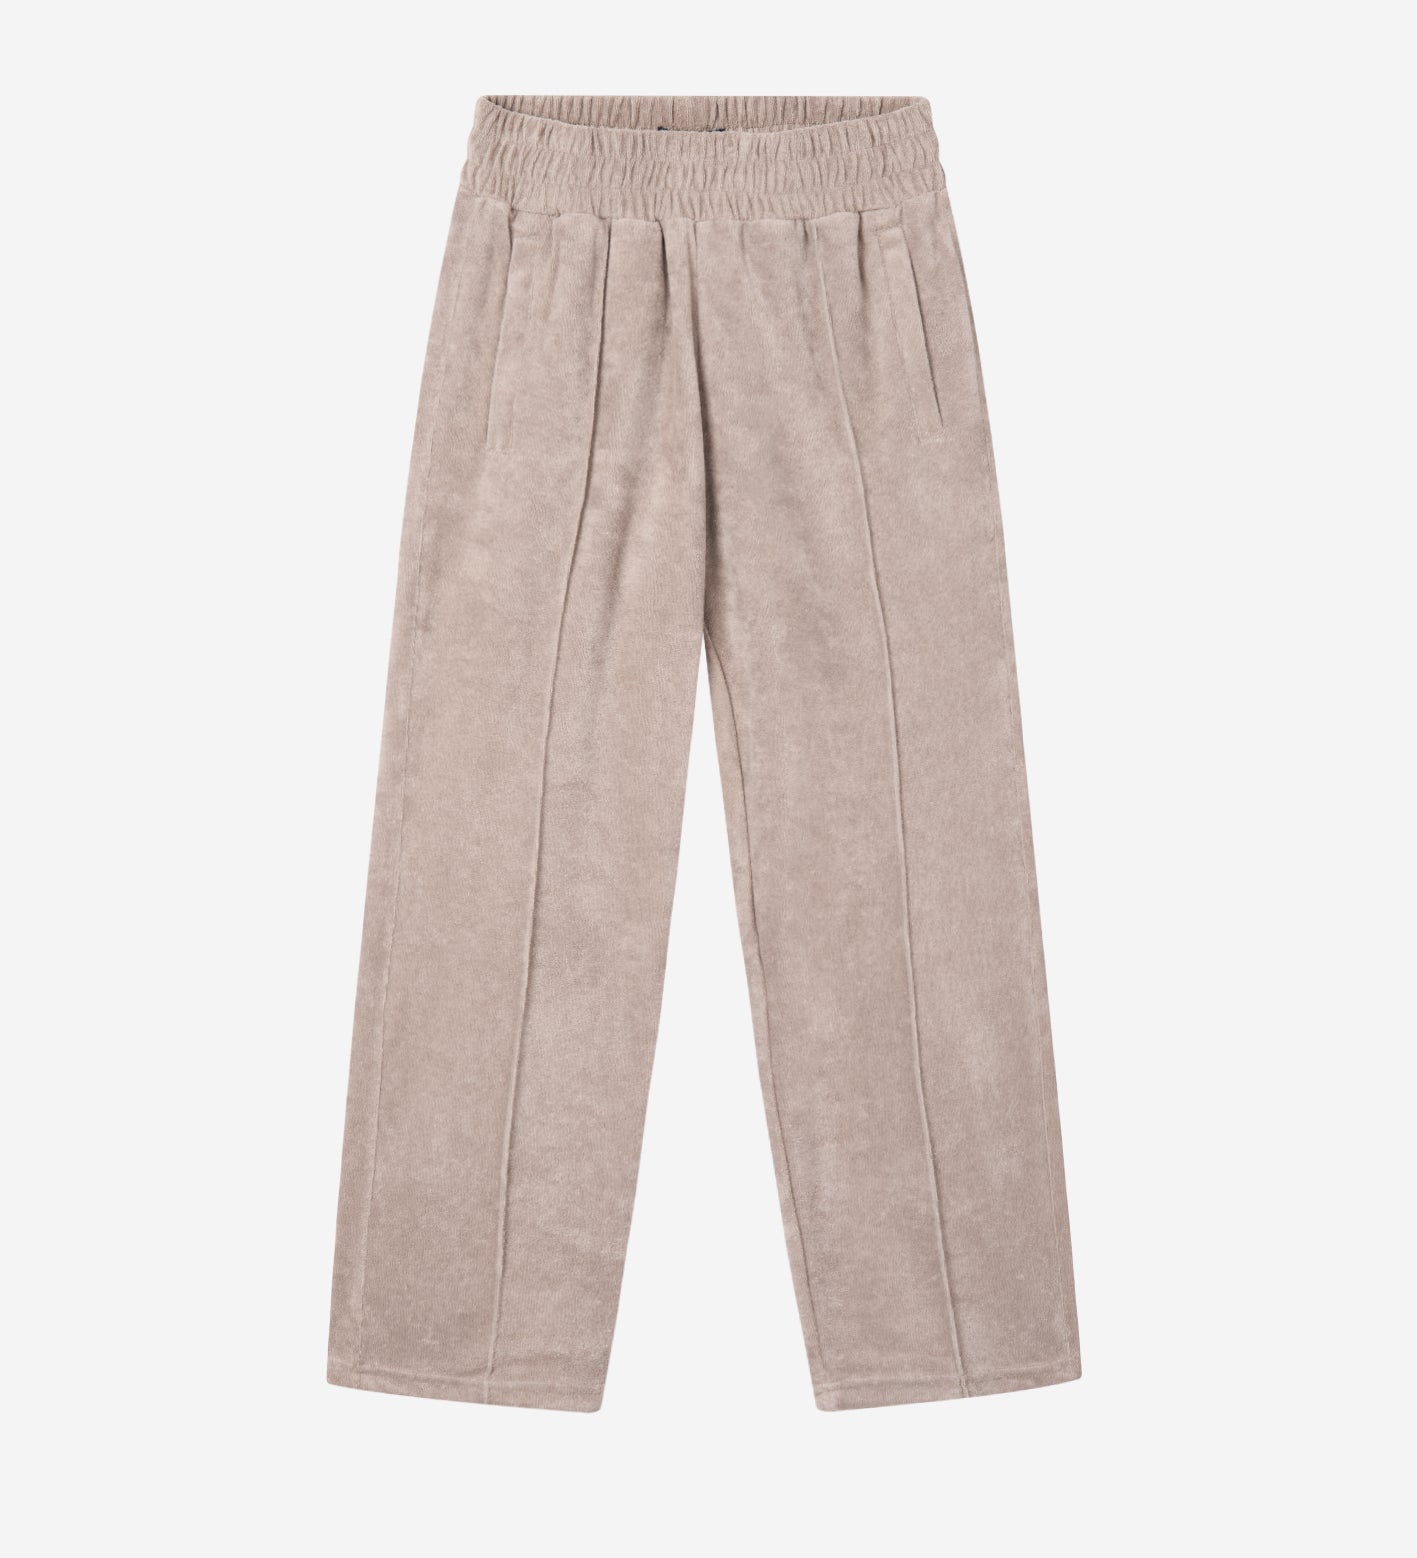 Cashmere colored long pants in Terry toweling fabric